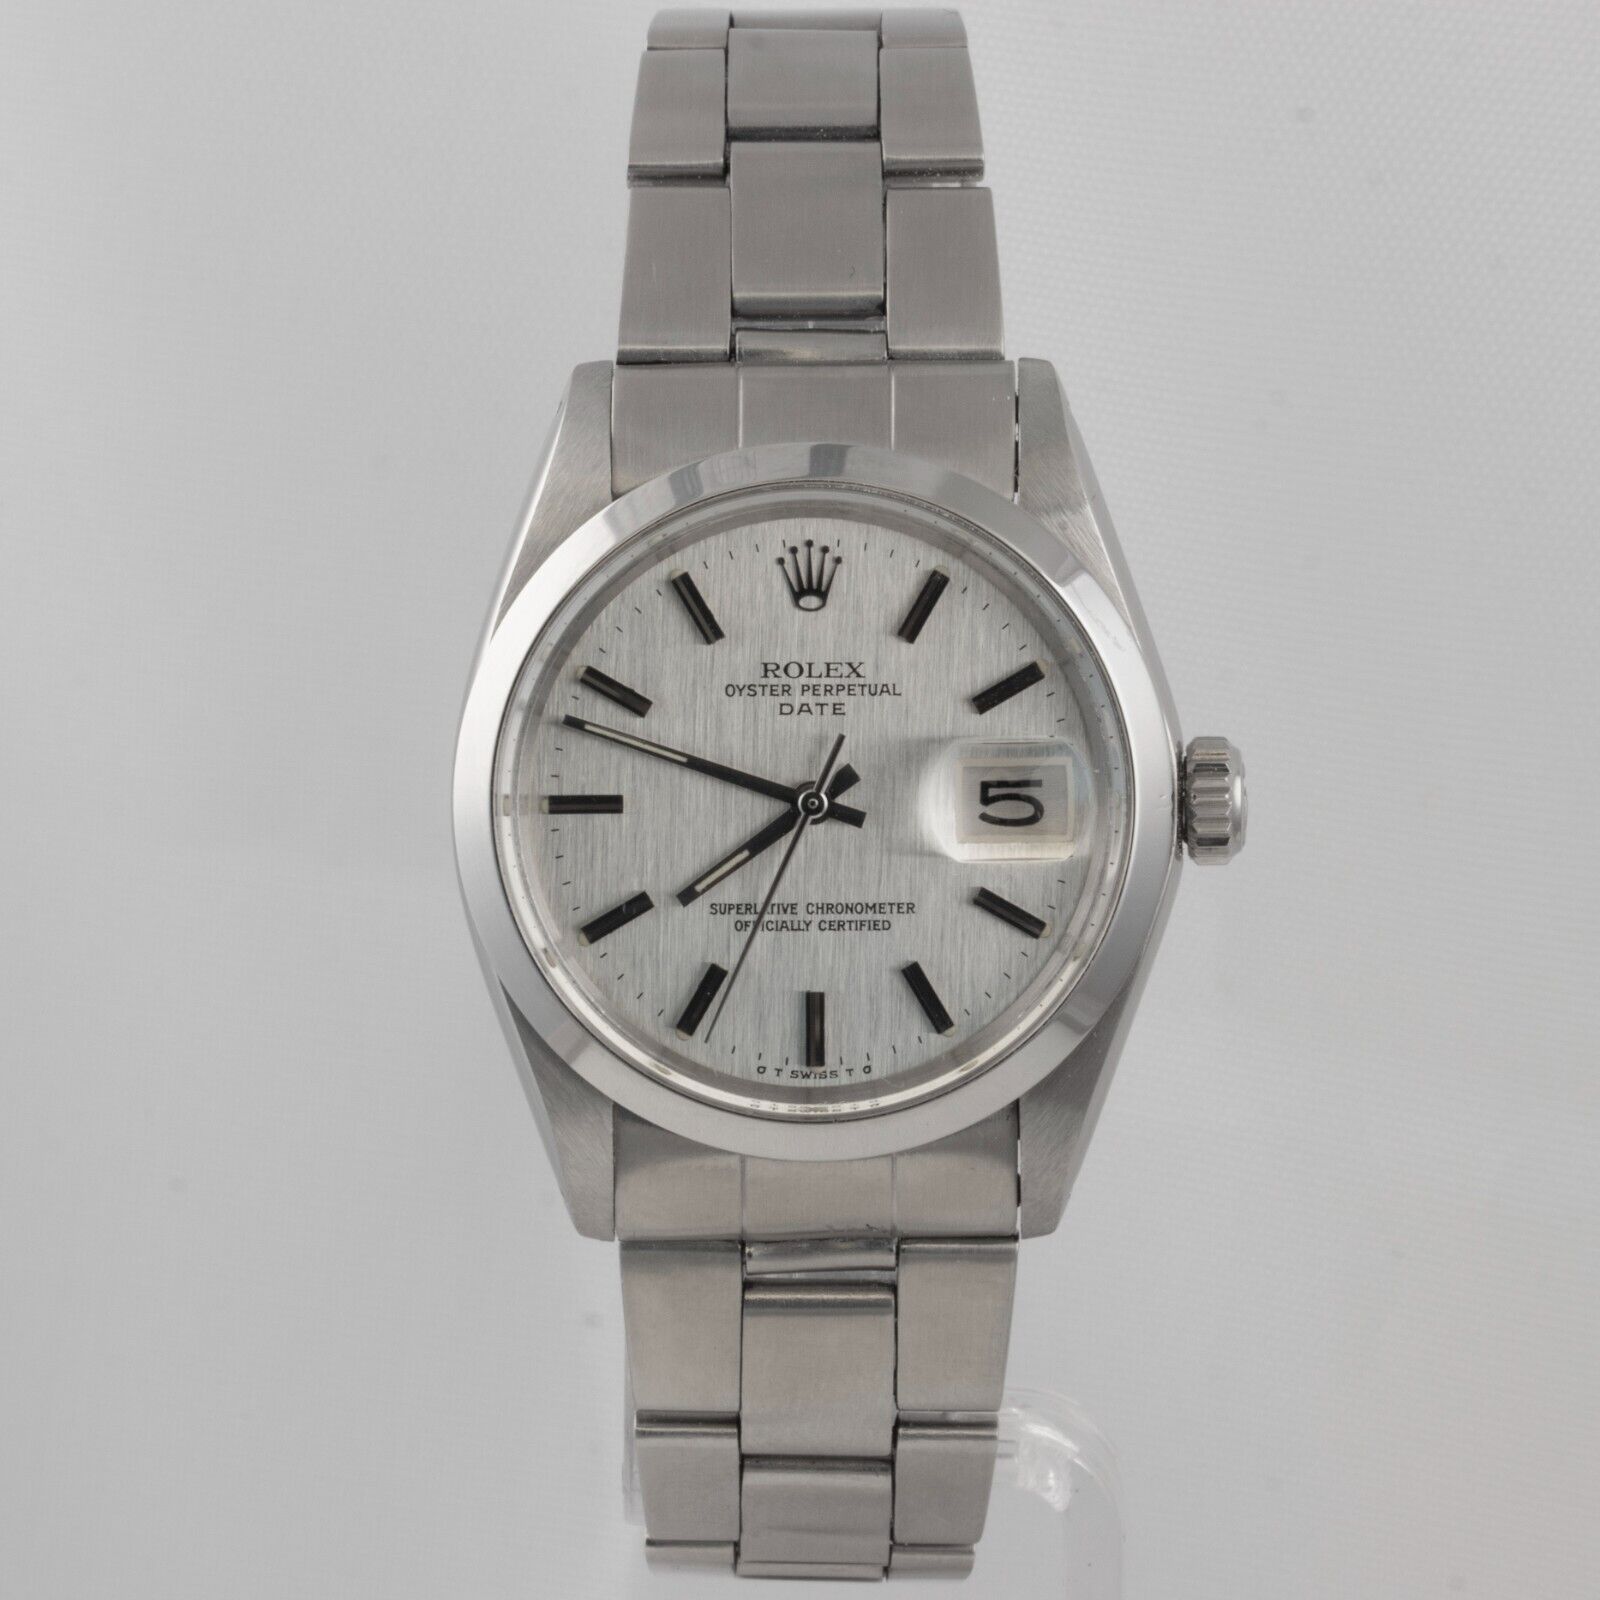 Vintage Rolex Perpetual Date 1500 Stainless Silver Linen Sigma Dial 34mm Watch